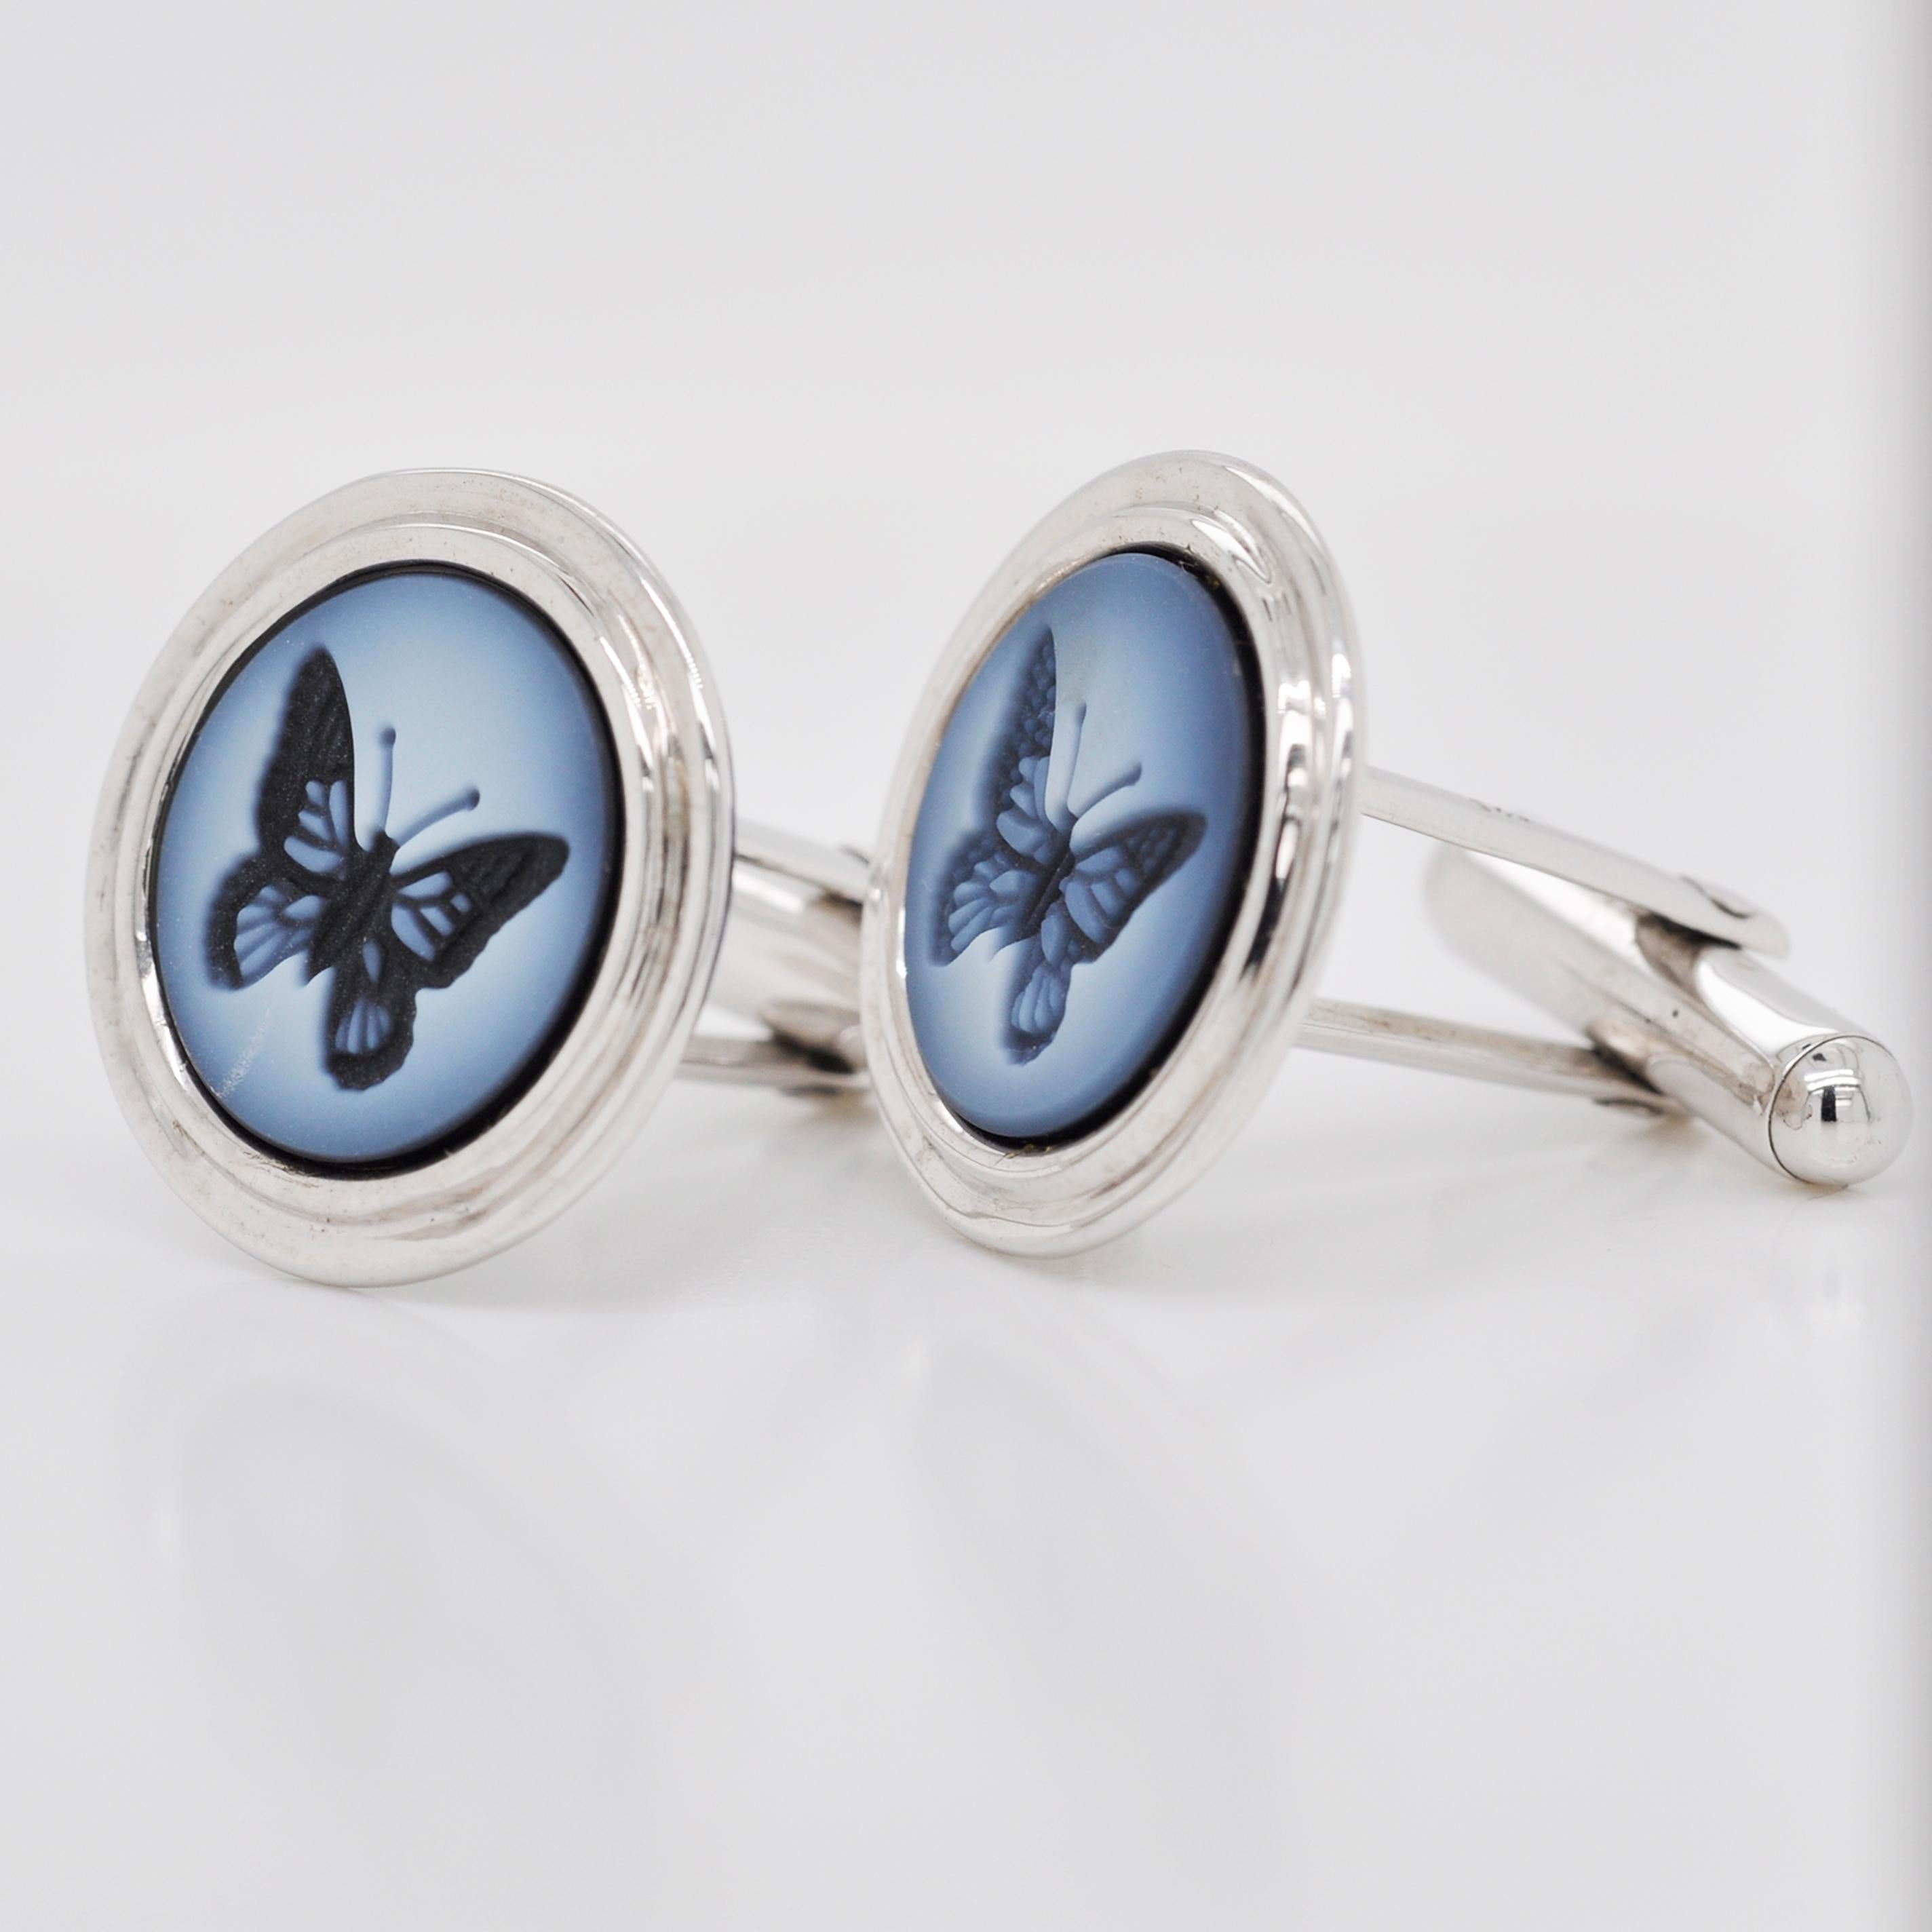 Butterfly Agate Intaglio Contemporary Sterling Silver Gemstone Cufflinks In New Condition For Sale In Jaipur, Rajasthan